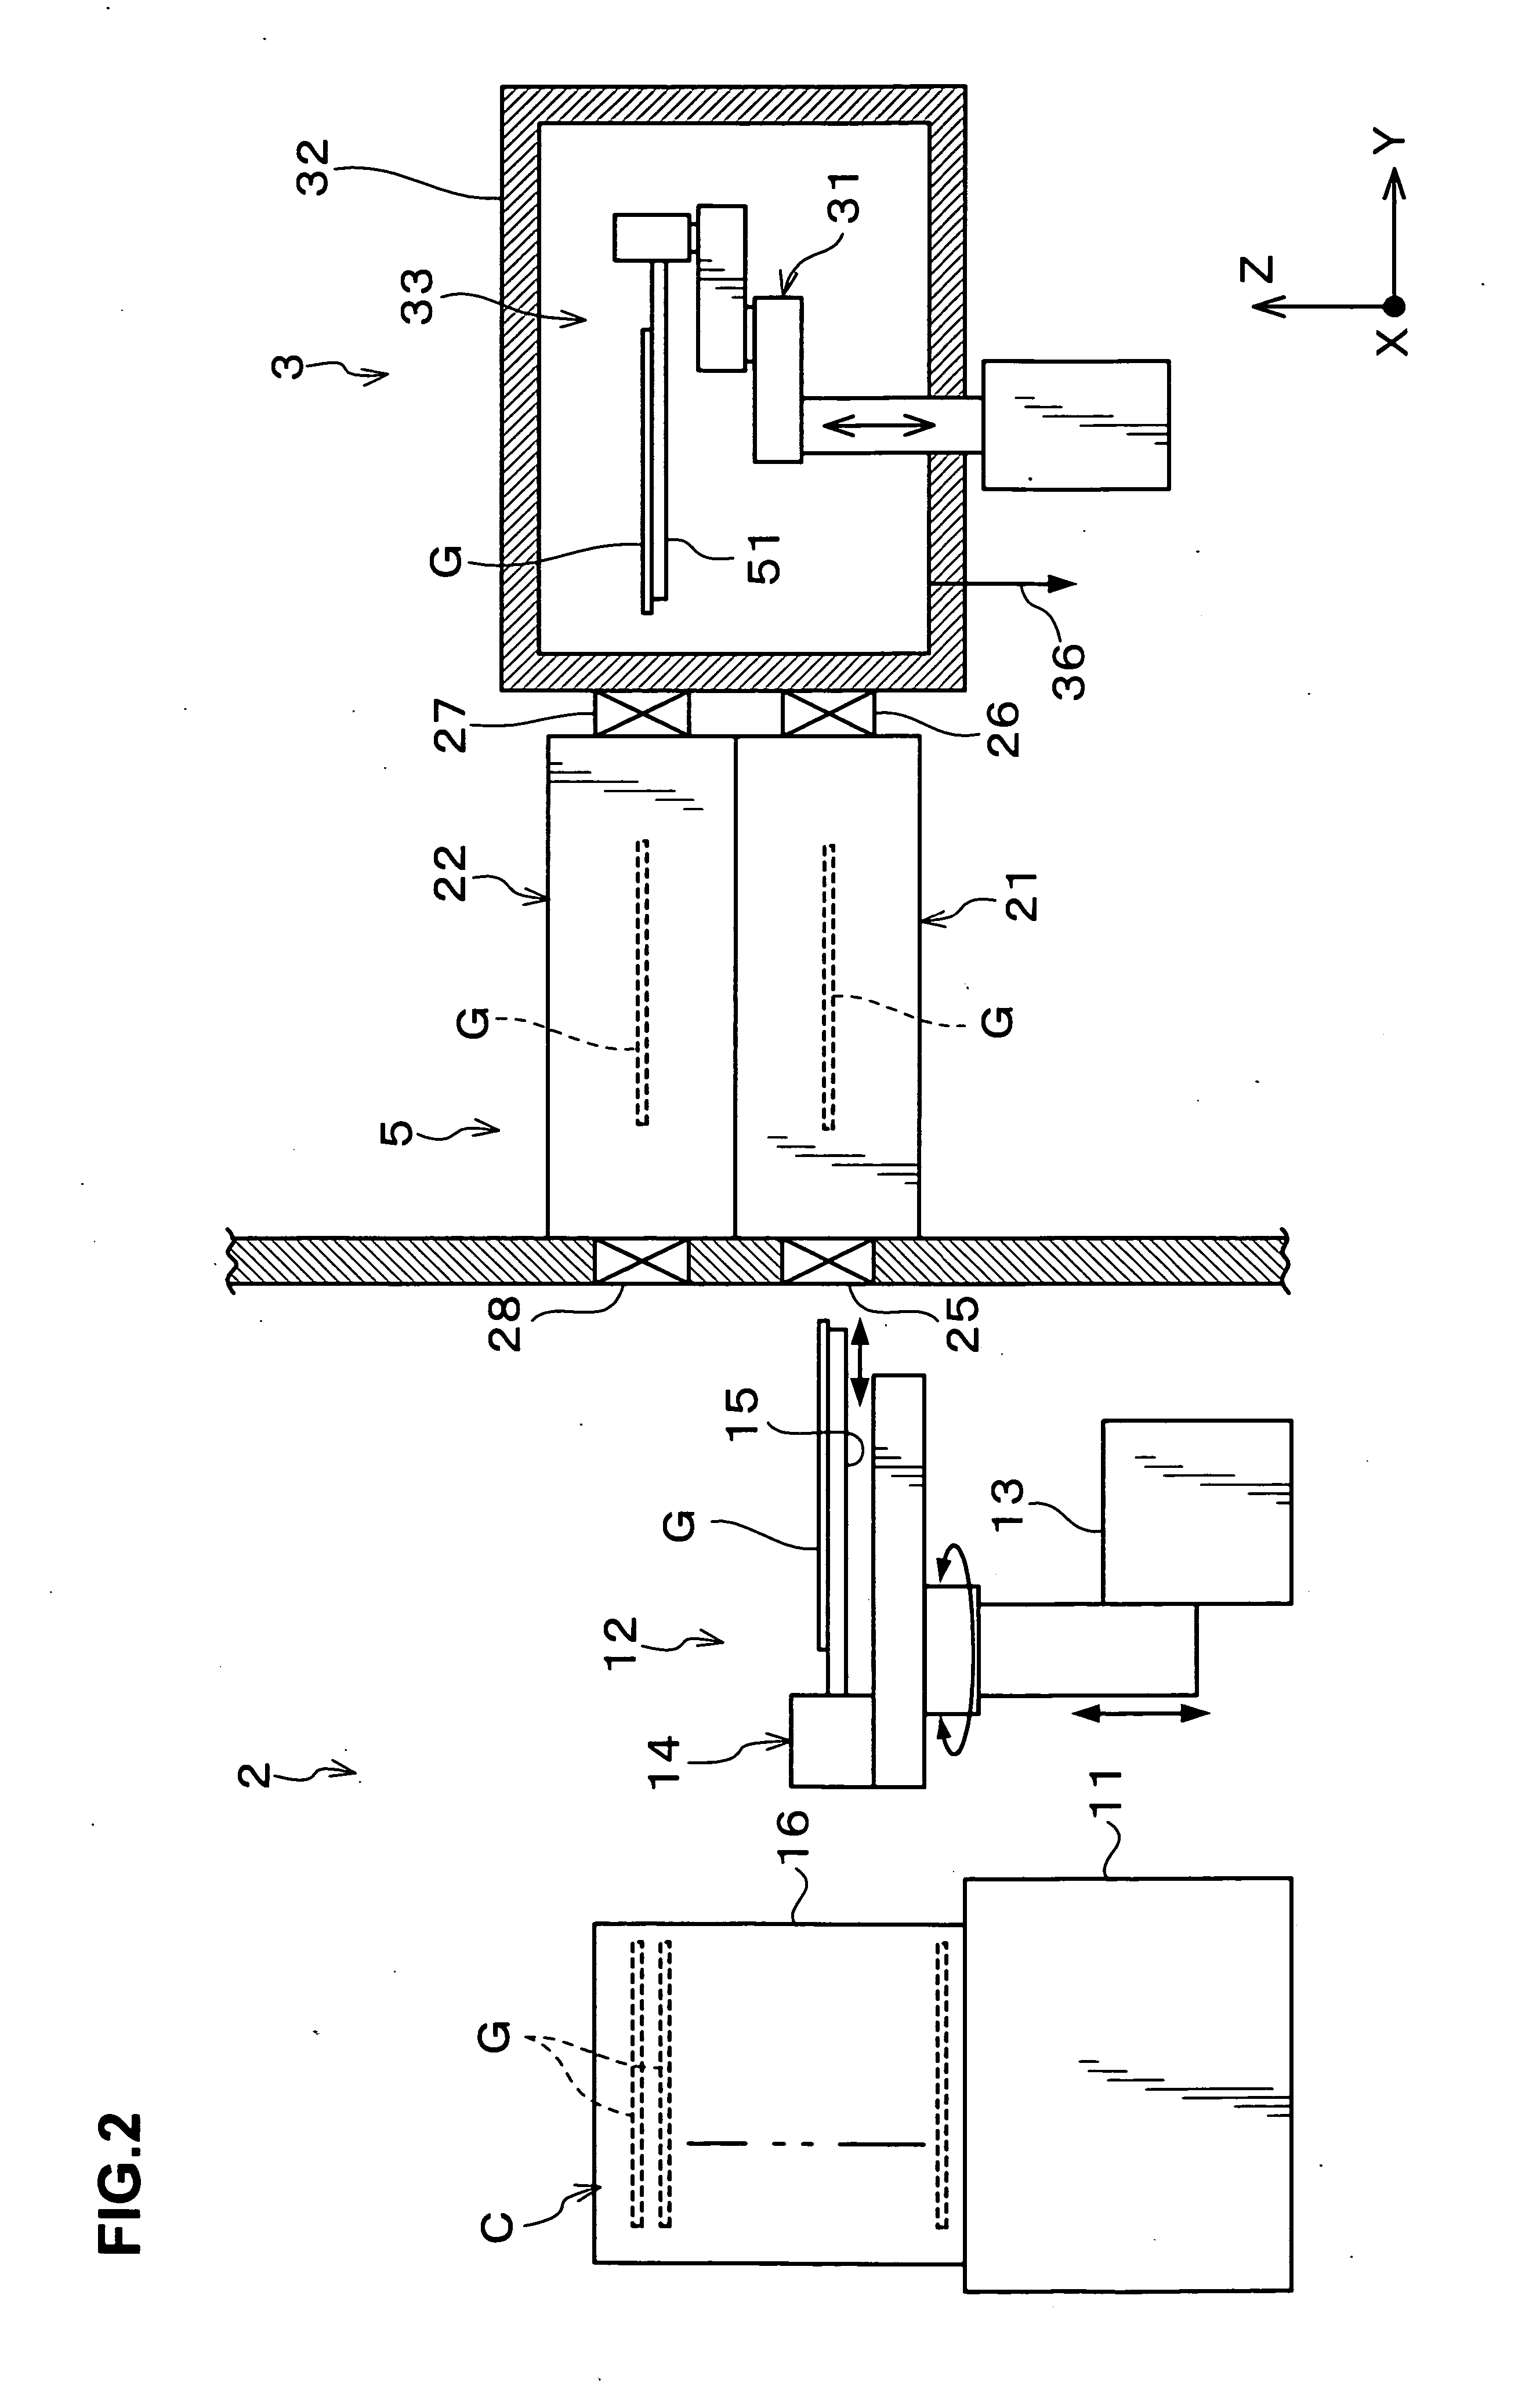 Load lock apparatus, processing system and substrate processing method